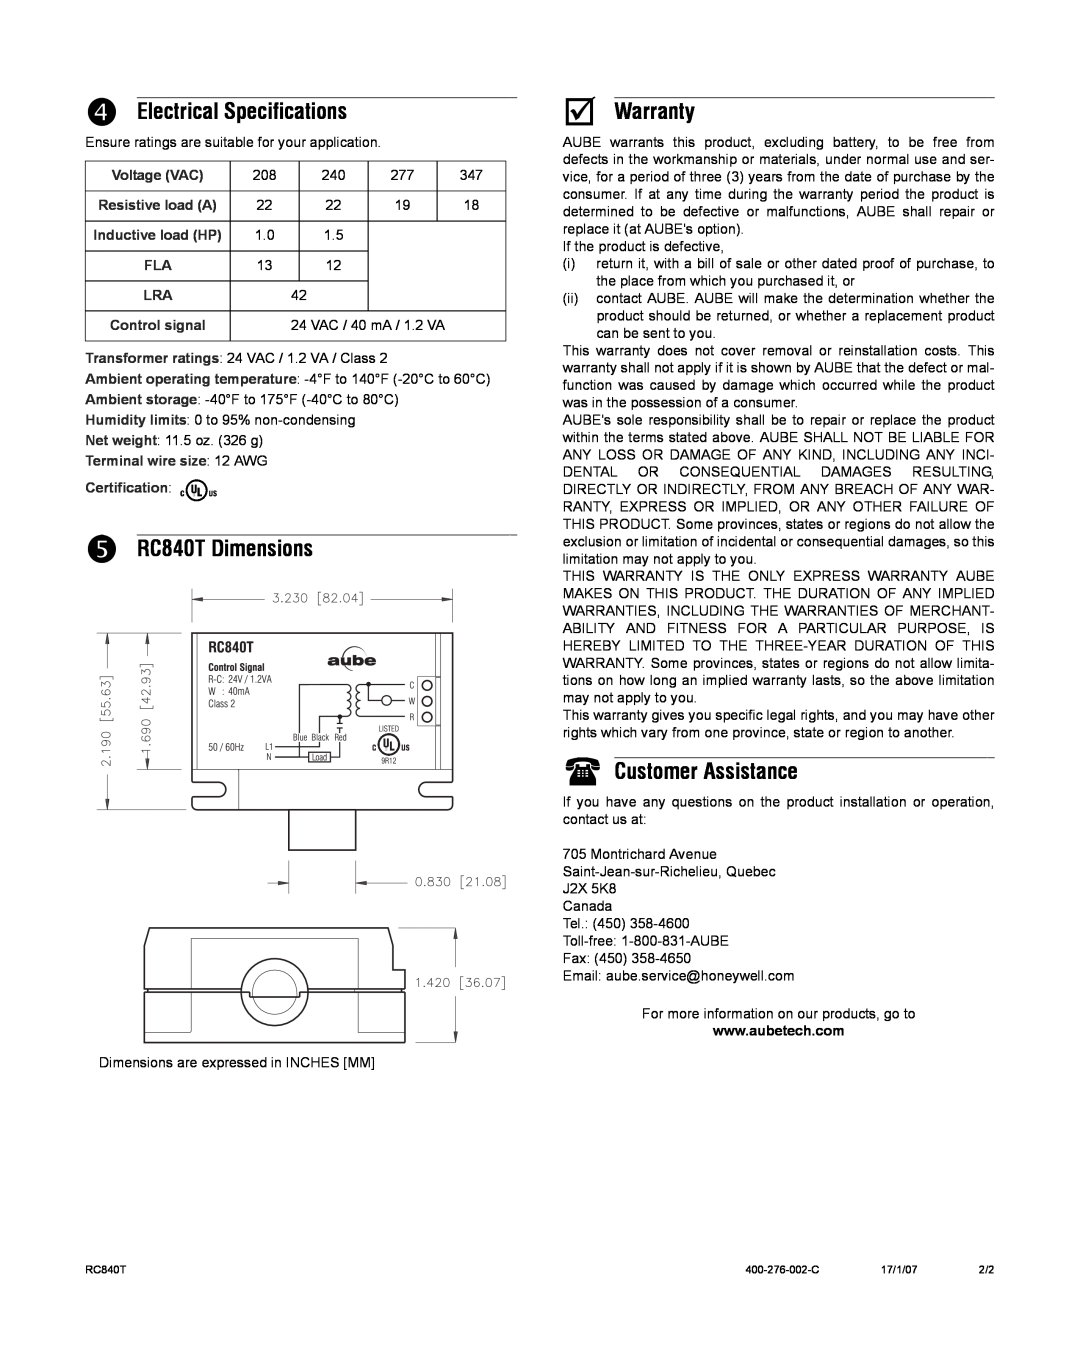 Aube Technologies manual q Electrical Specifications, r RC840T Dimensions, Warranty, Customer Assistance, Voltage VAC 